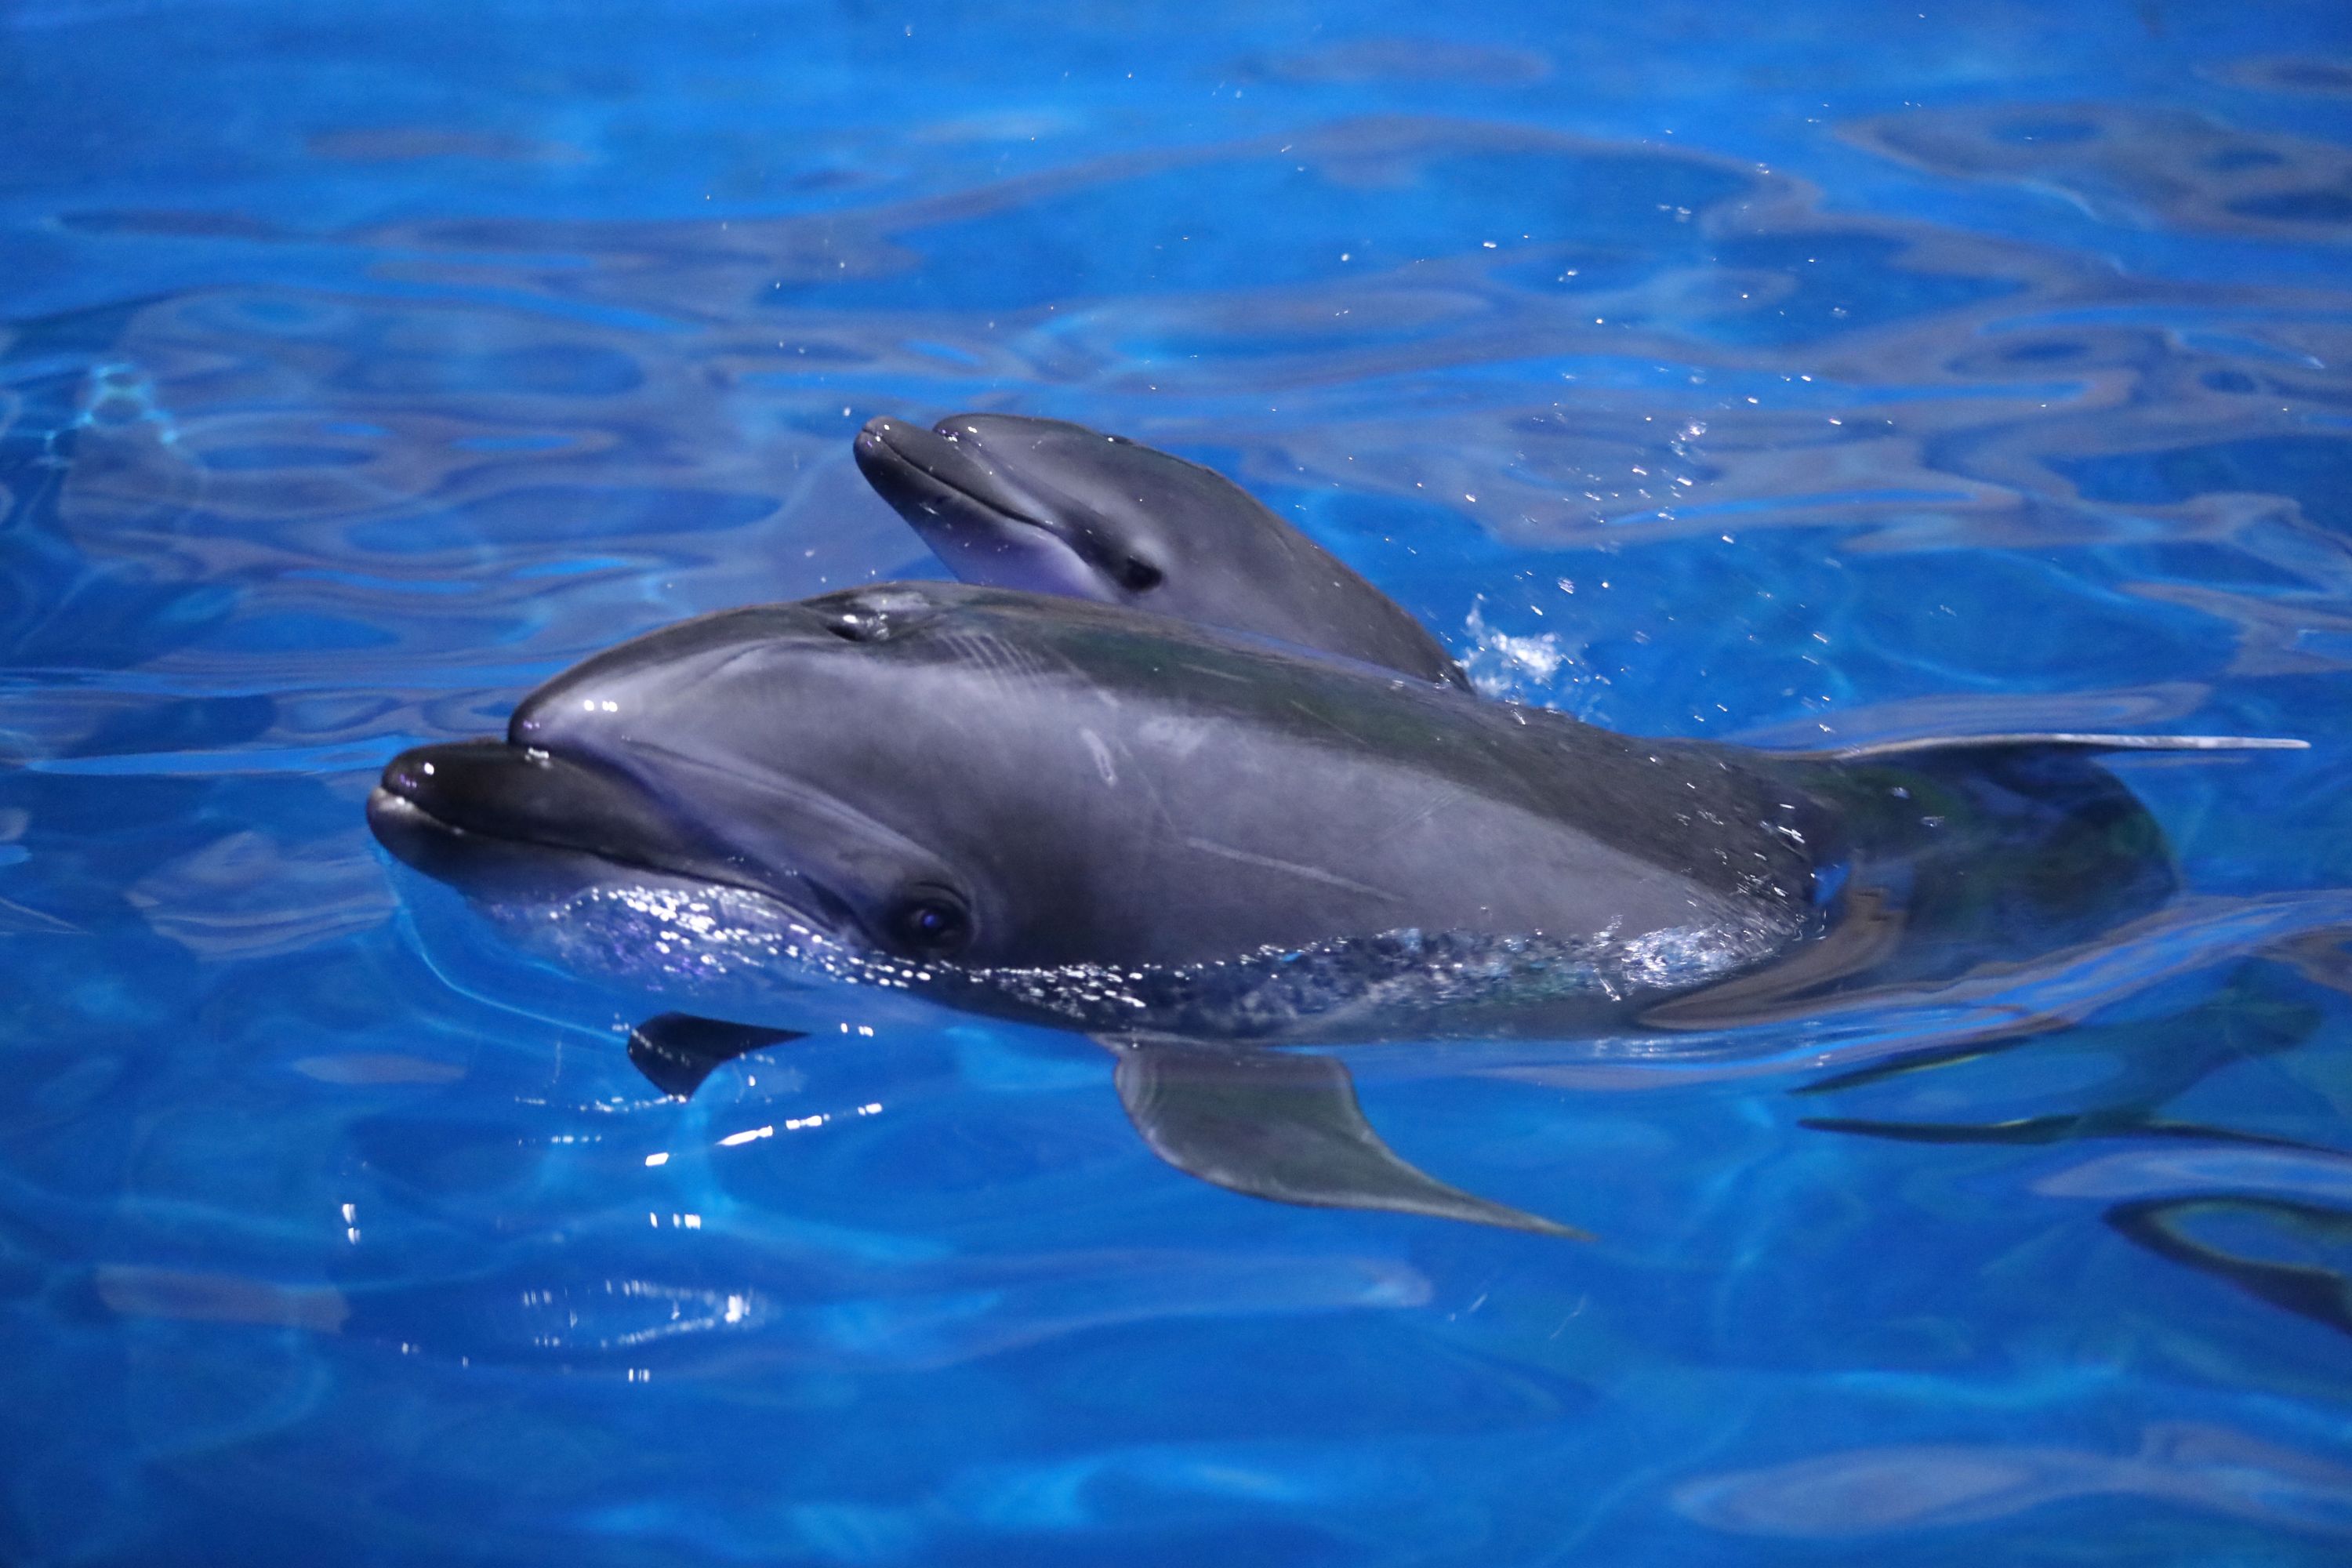 First baby dolphin born this year in Wuhan｜今年国内首只新生海豚降生武汉